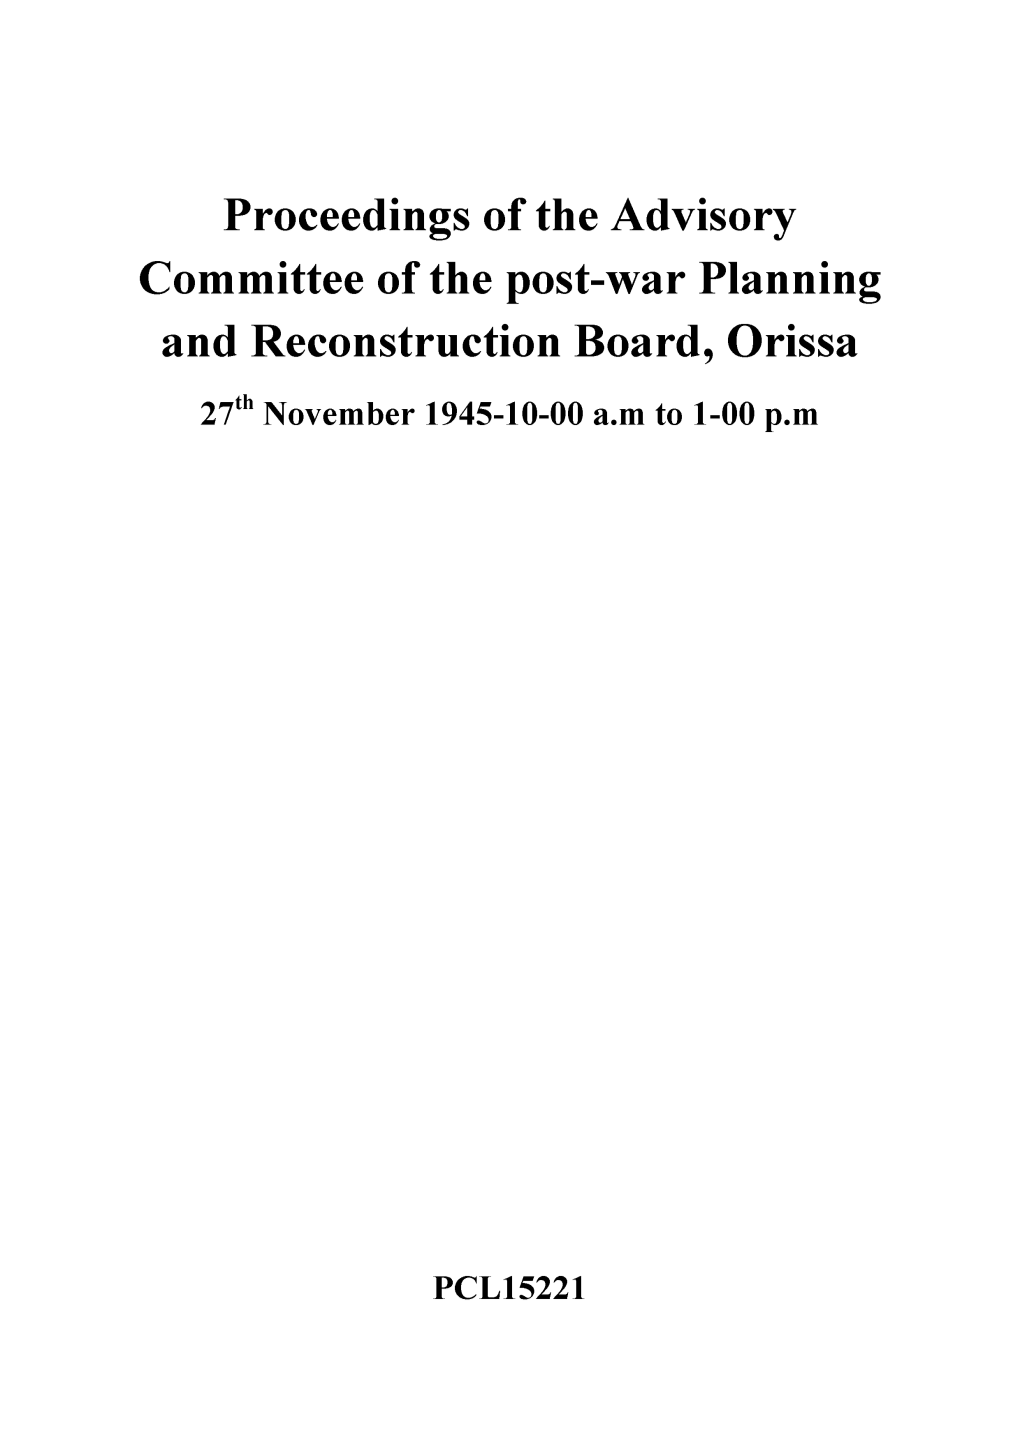 Proceedings of the Advisory Committee of the Post-War Planning and Reconstruction Board, Orissa 27Th November 1945-10-00 A.M to 1-00 P.M